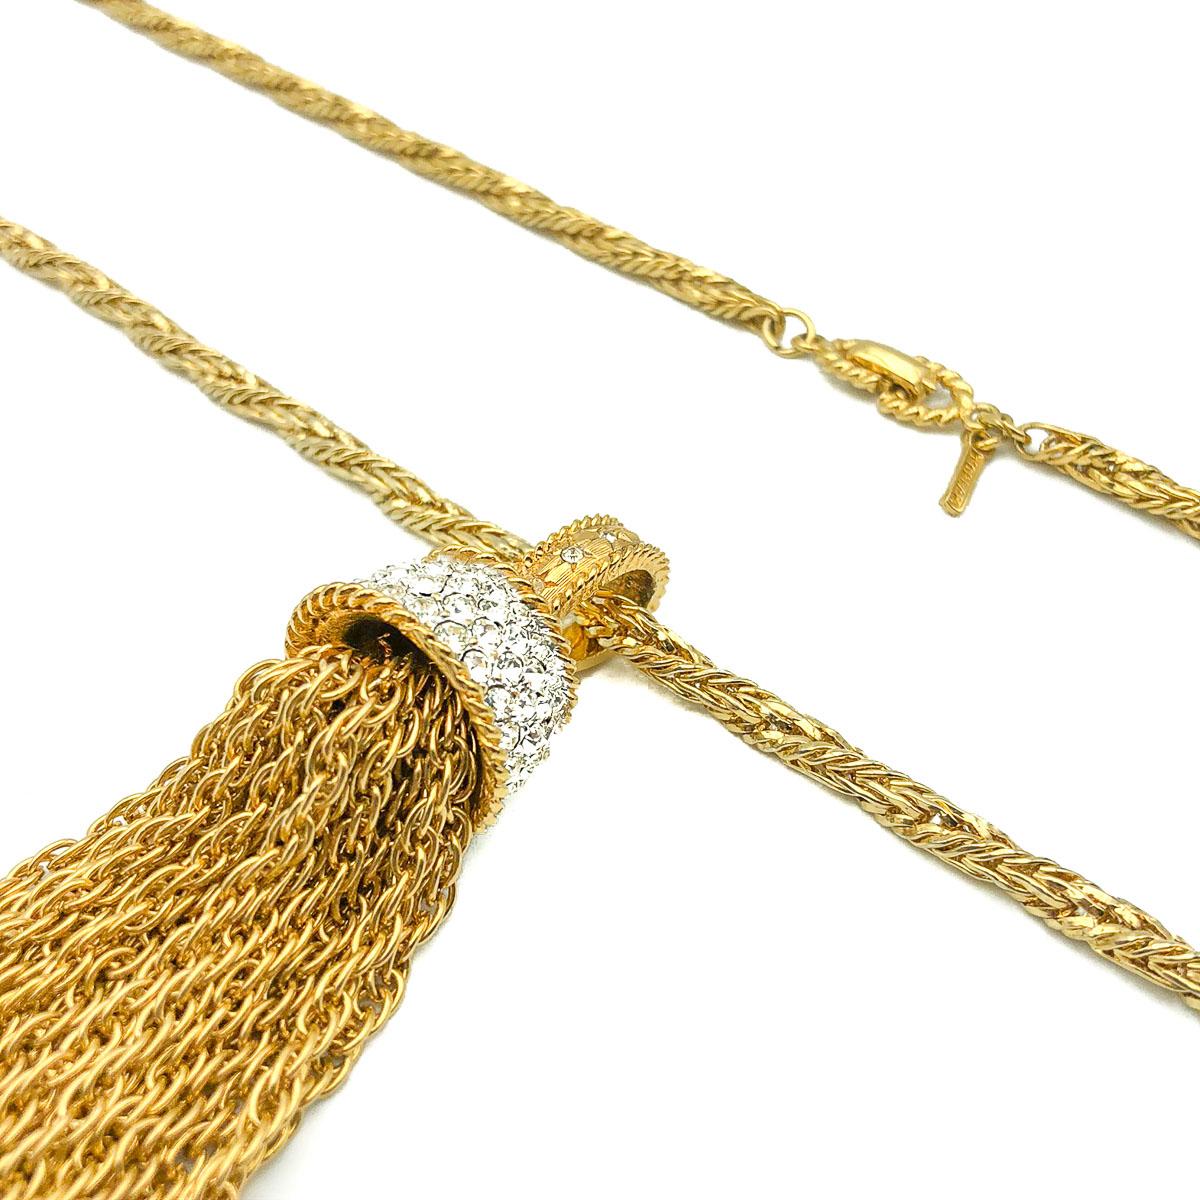 A superbly glamorous Vintage D'Orlan Tassel Necklace. Featuring an adorable, long, thick rope style chain necklace dropping away to an impressive rhinestone embellished tassel pendant that catches the eye with its beautiful movement. 
Vintage